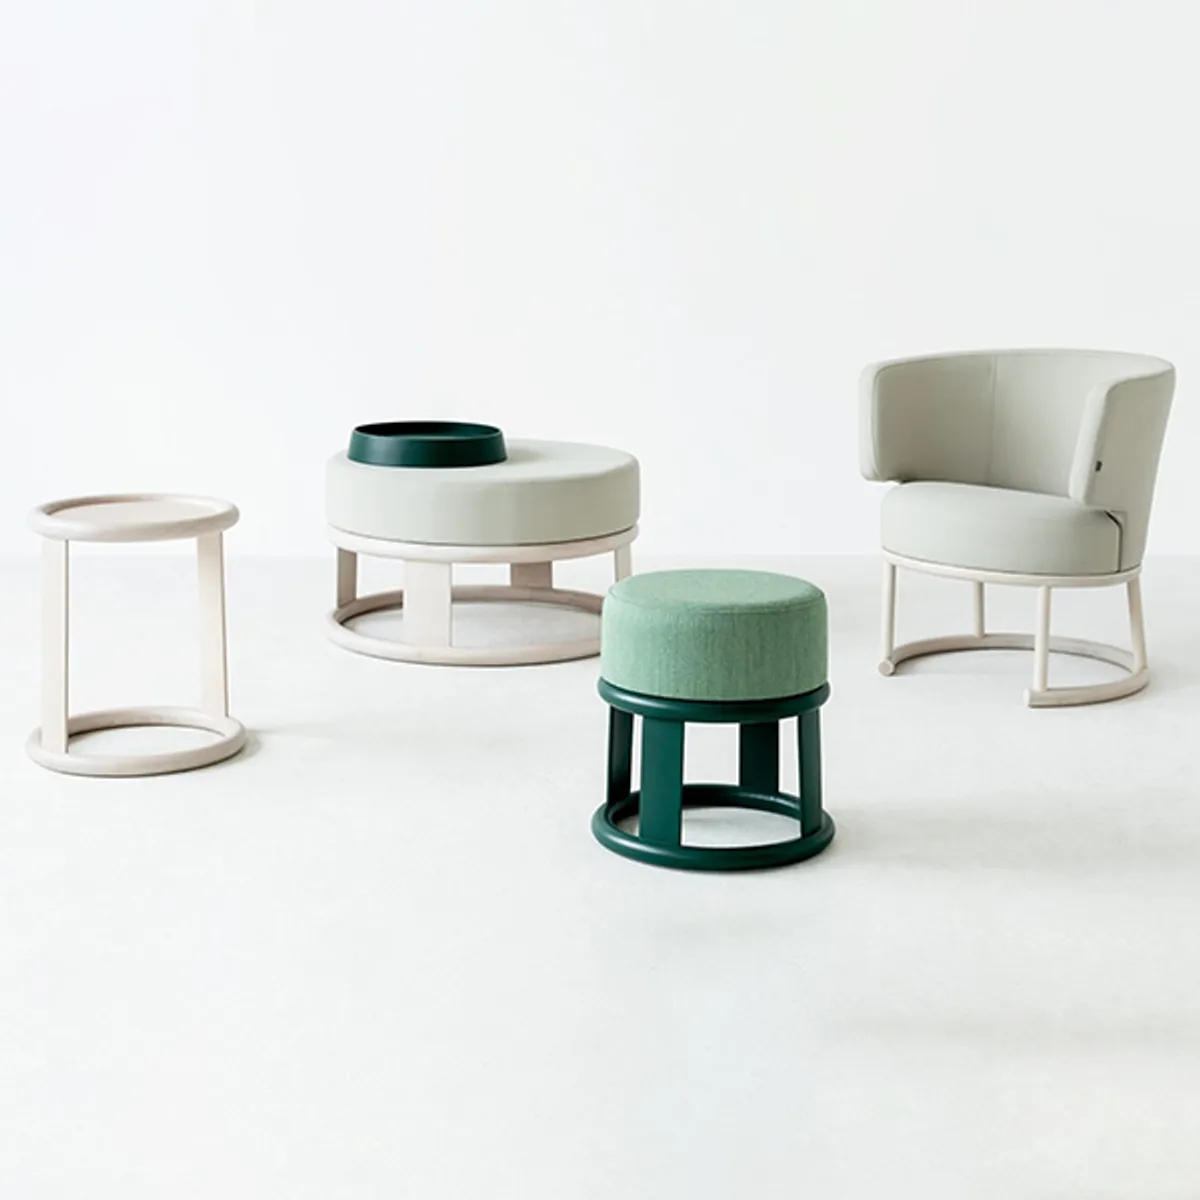 Bakerloo Collection Of Commercial Chairs And Stools By Insideoutcontracts 020